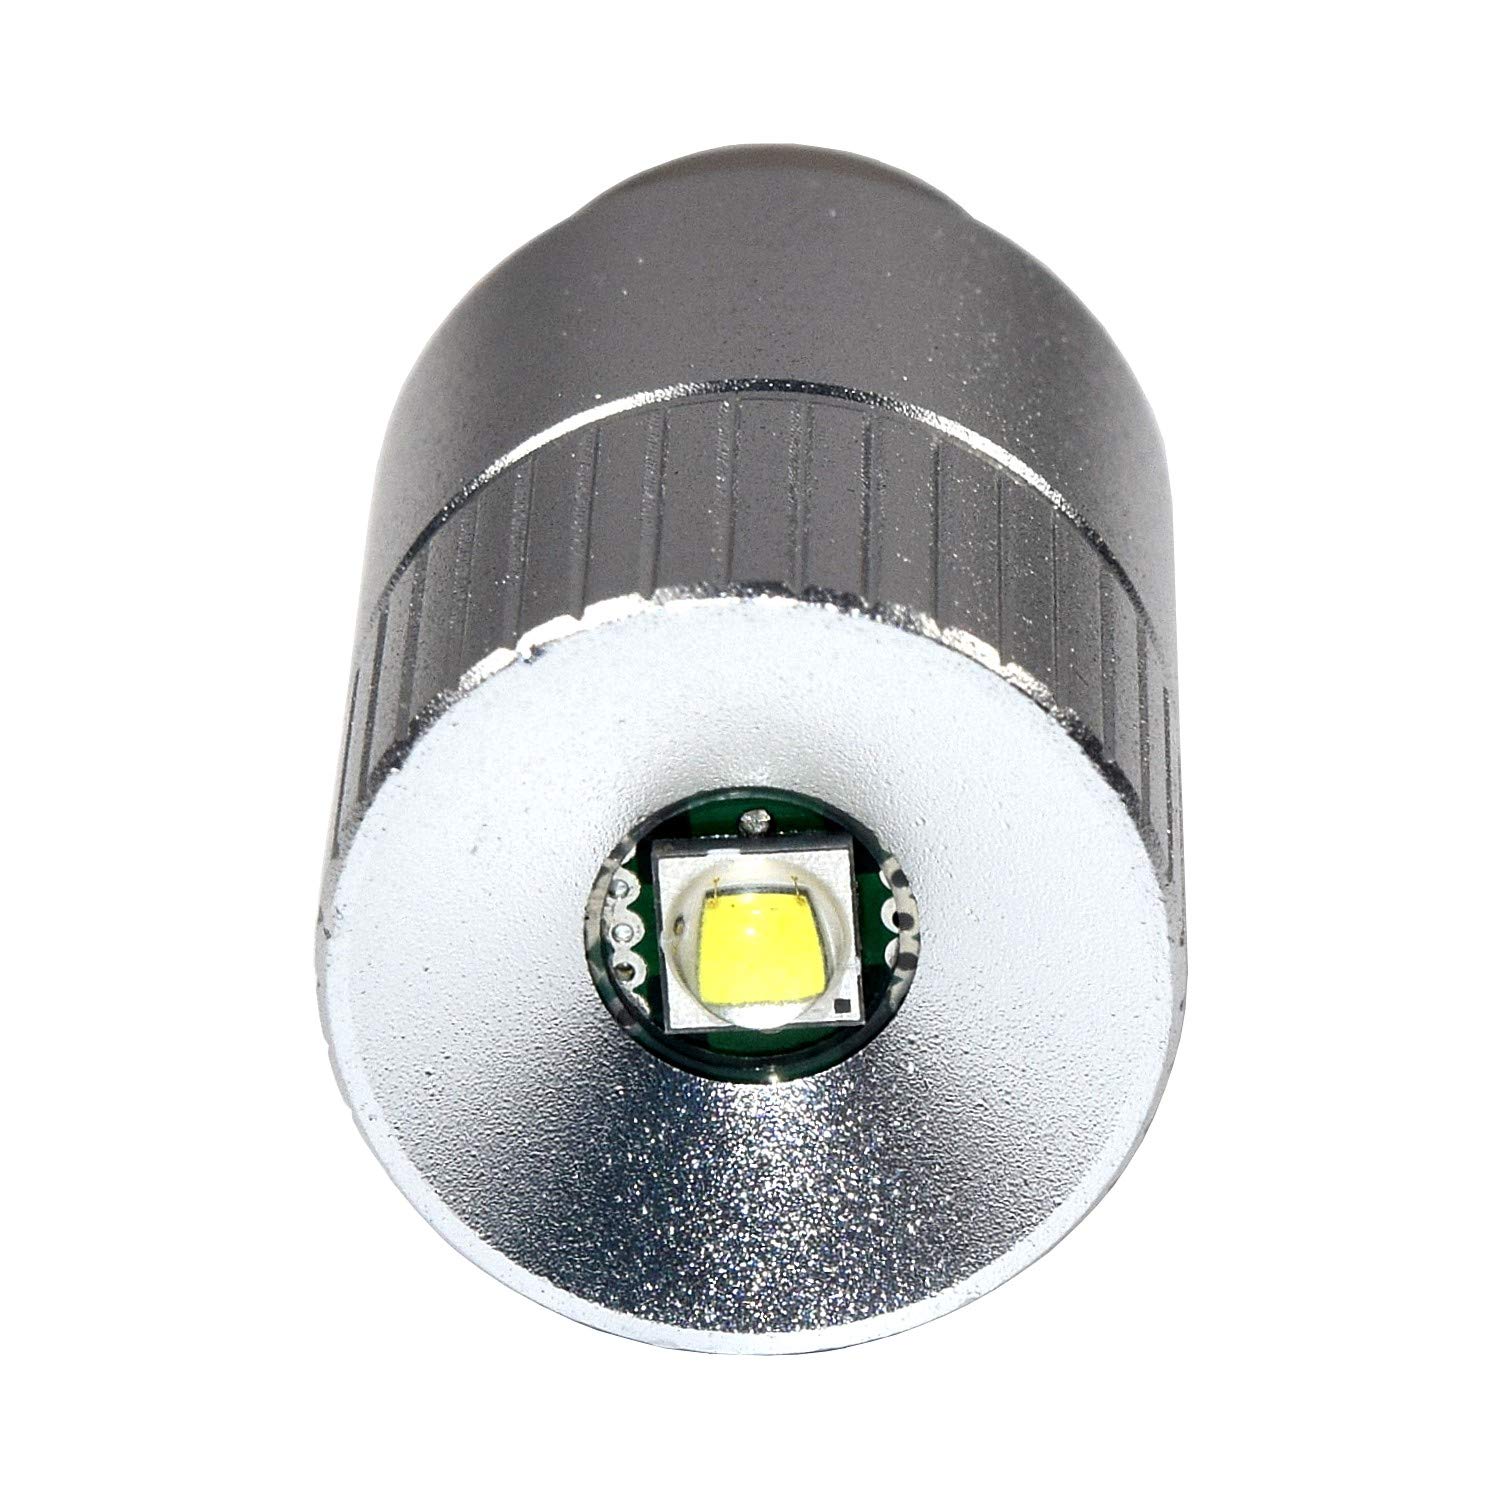 Power 3w Led Conversion Upgrade Bulb, What Is The Brightest Led Flashlight Bulb